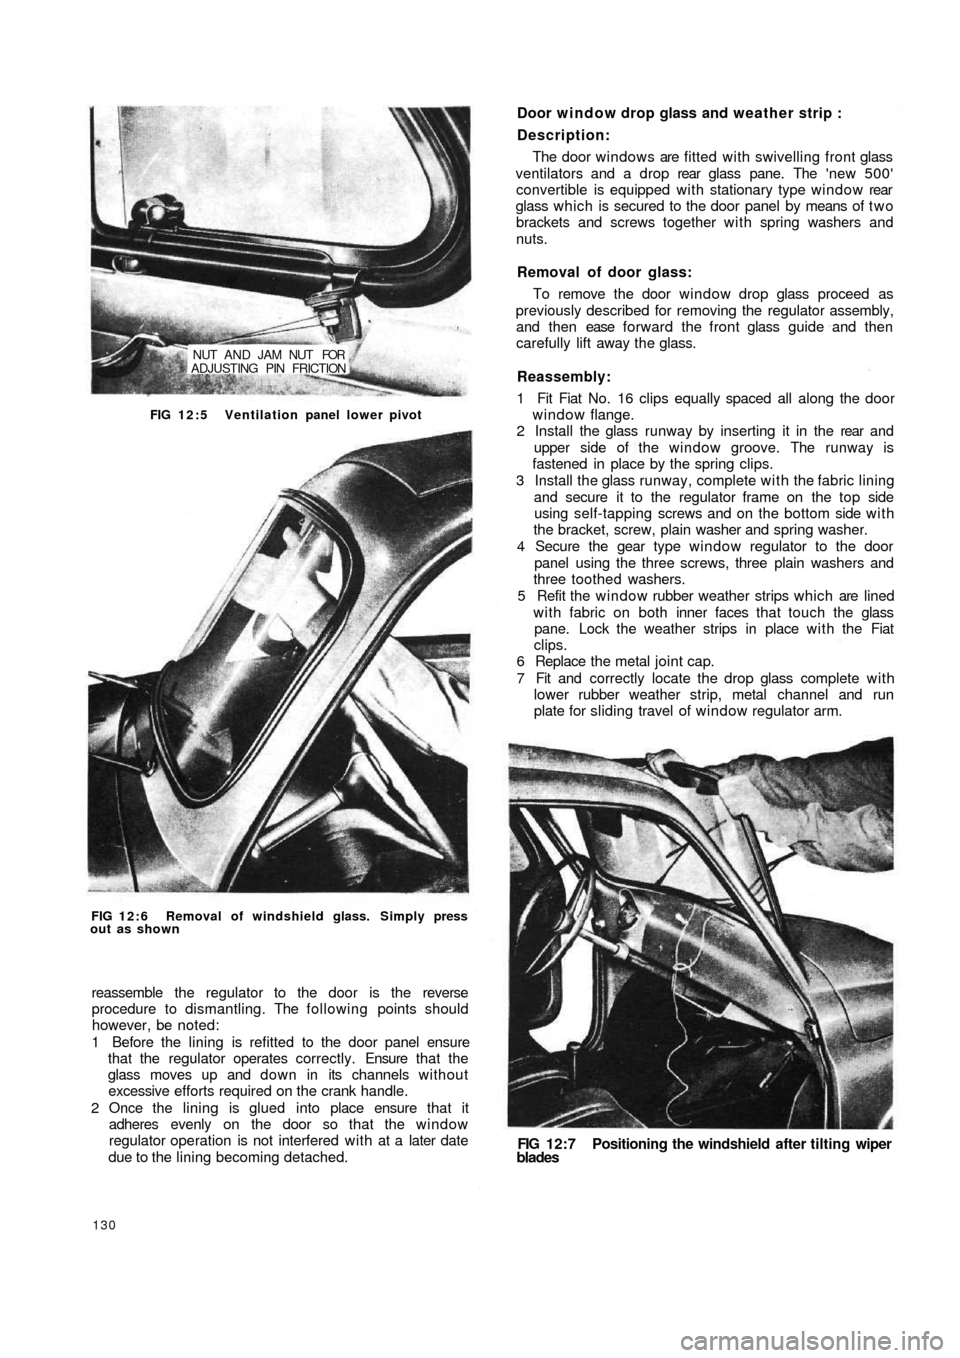 FIAT 500 1959 1.G Workshop Manual NUT AND JAM NUT  FOR
ADJUSTING PIN FRICTION
FIG 12:5  Ventilation panel lower pivot
FIG 12:6 Removal of windshield glass. Simply press
out as shown
reassemble the regulator to the door is the reverse
